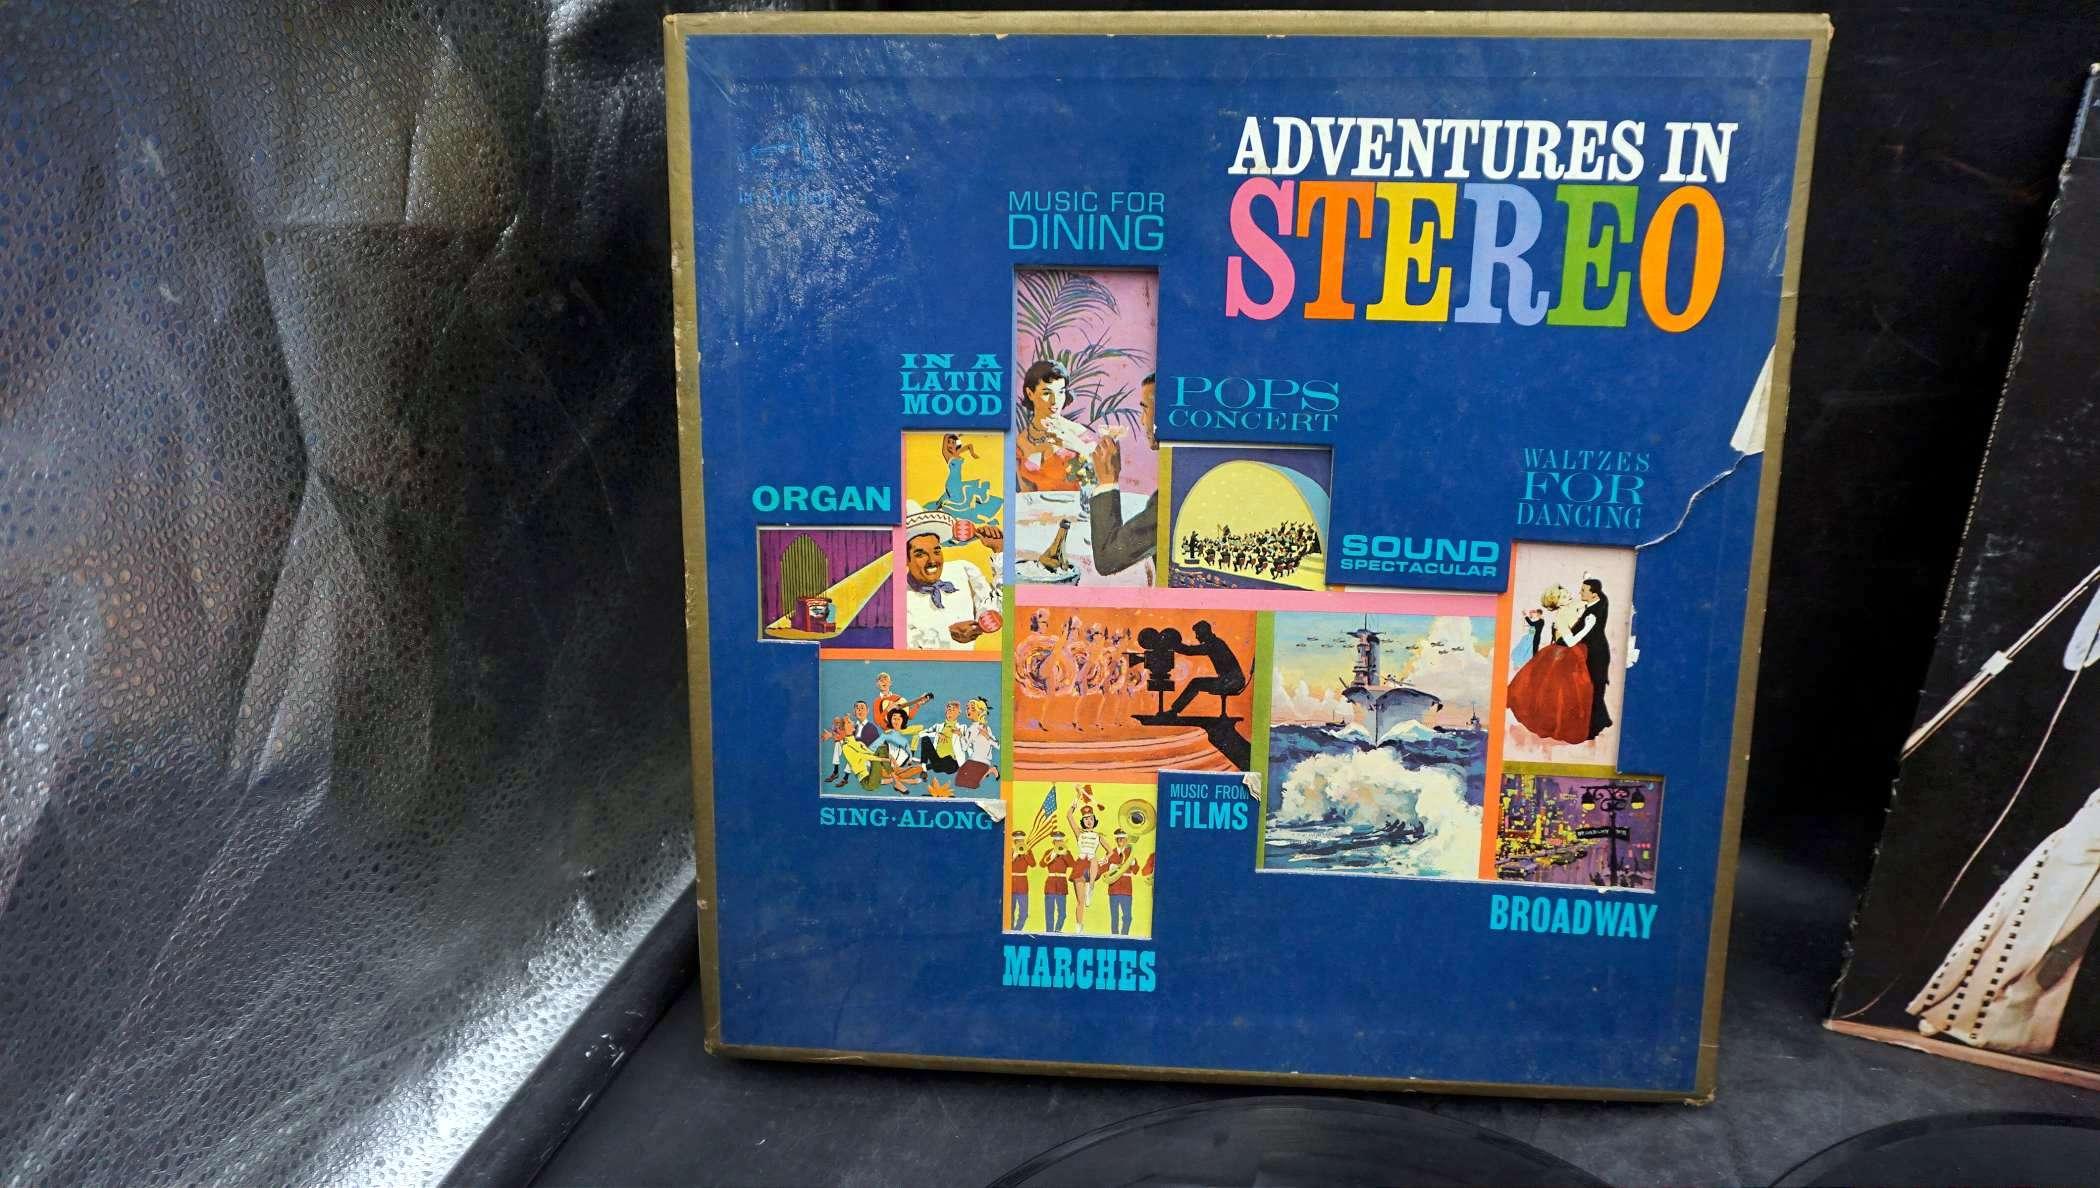 2 Records - Elvis & Adventures In Stereo